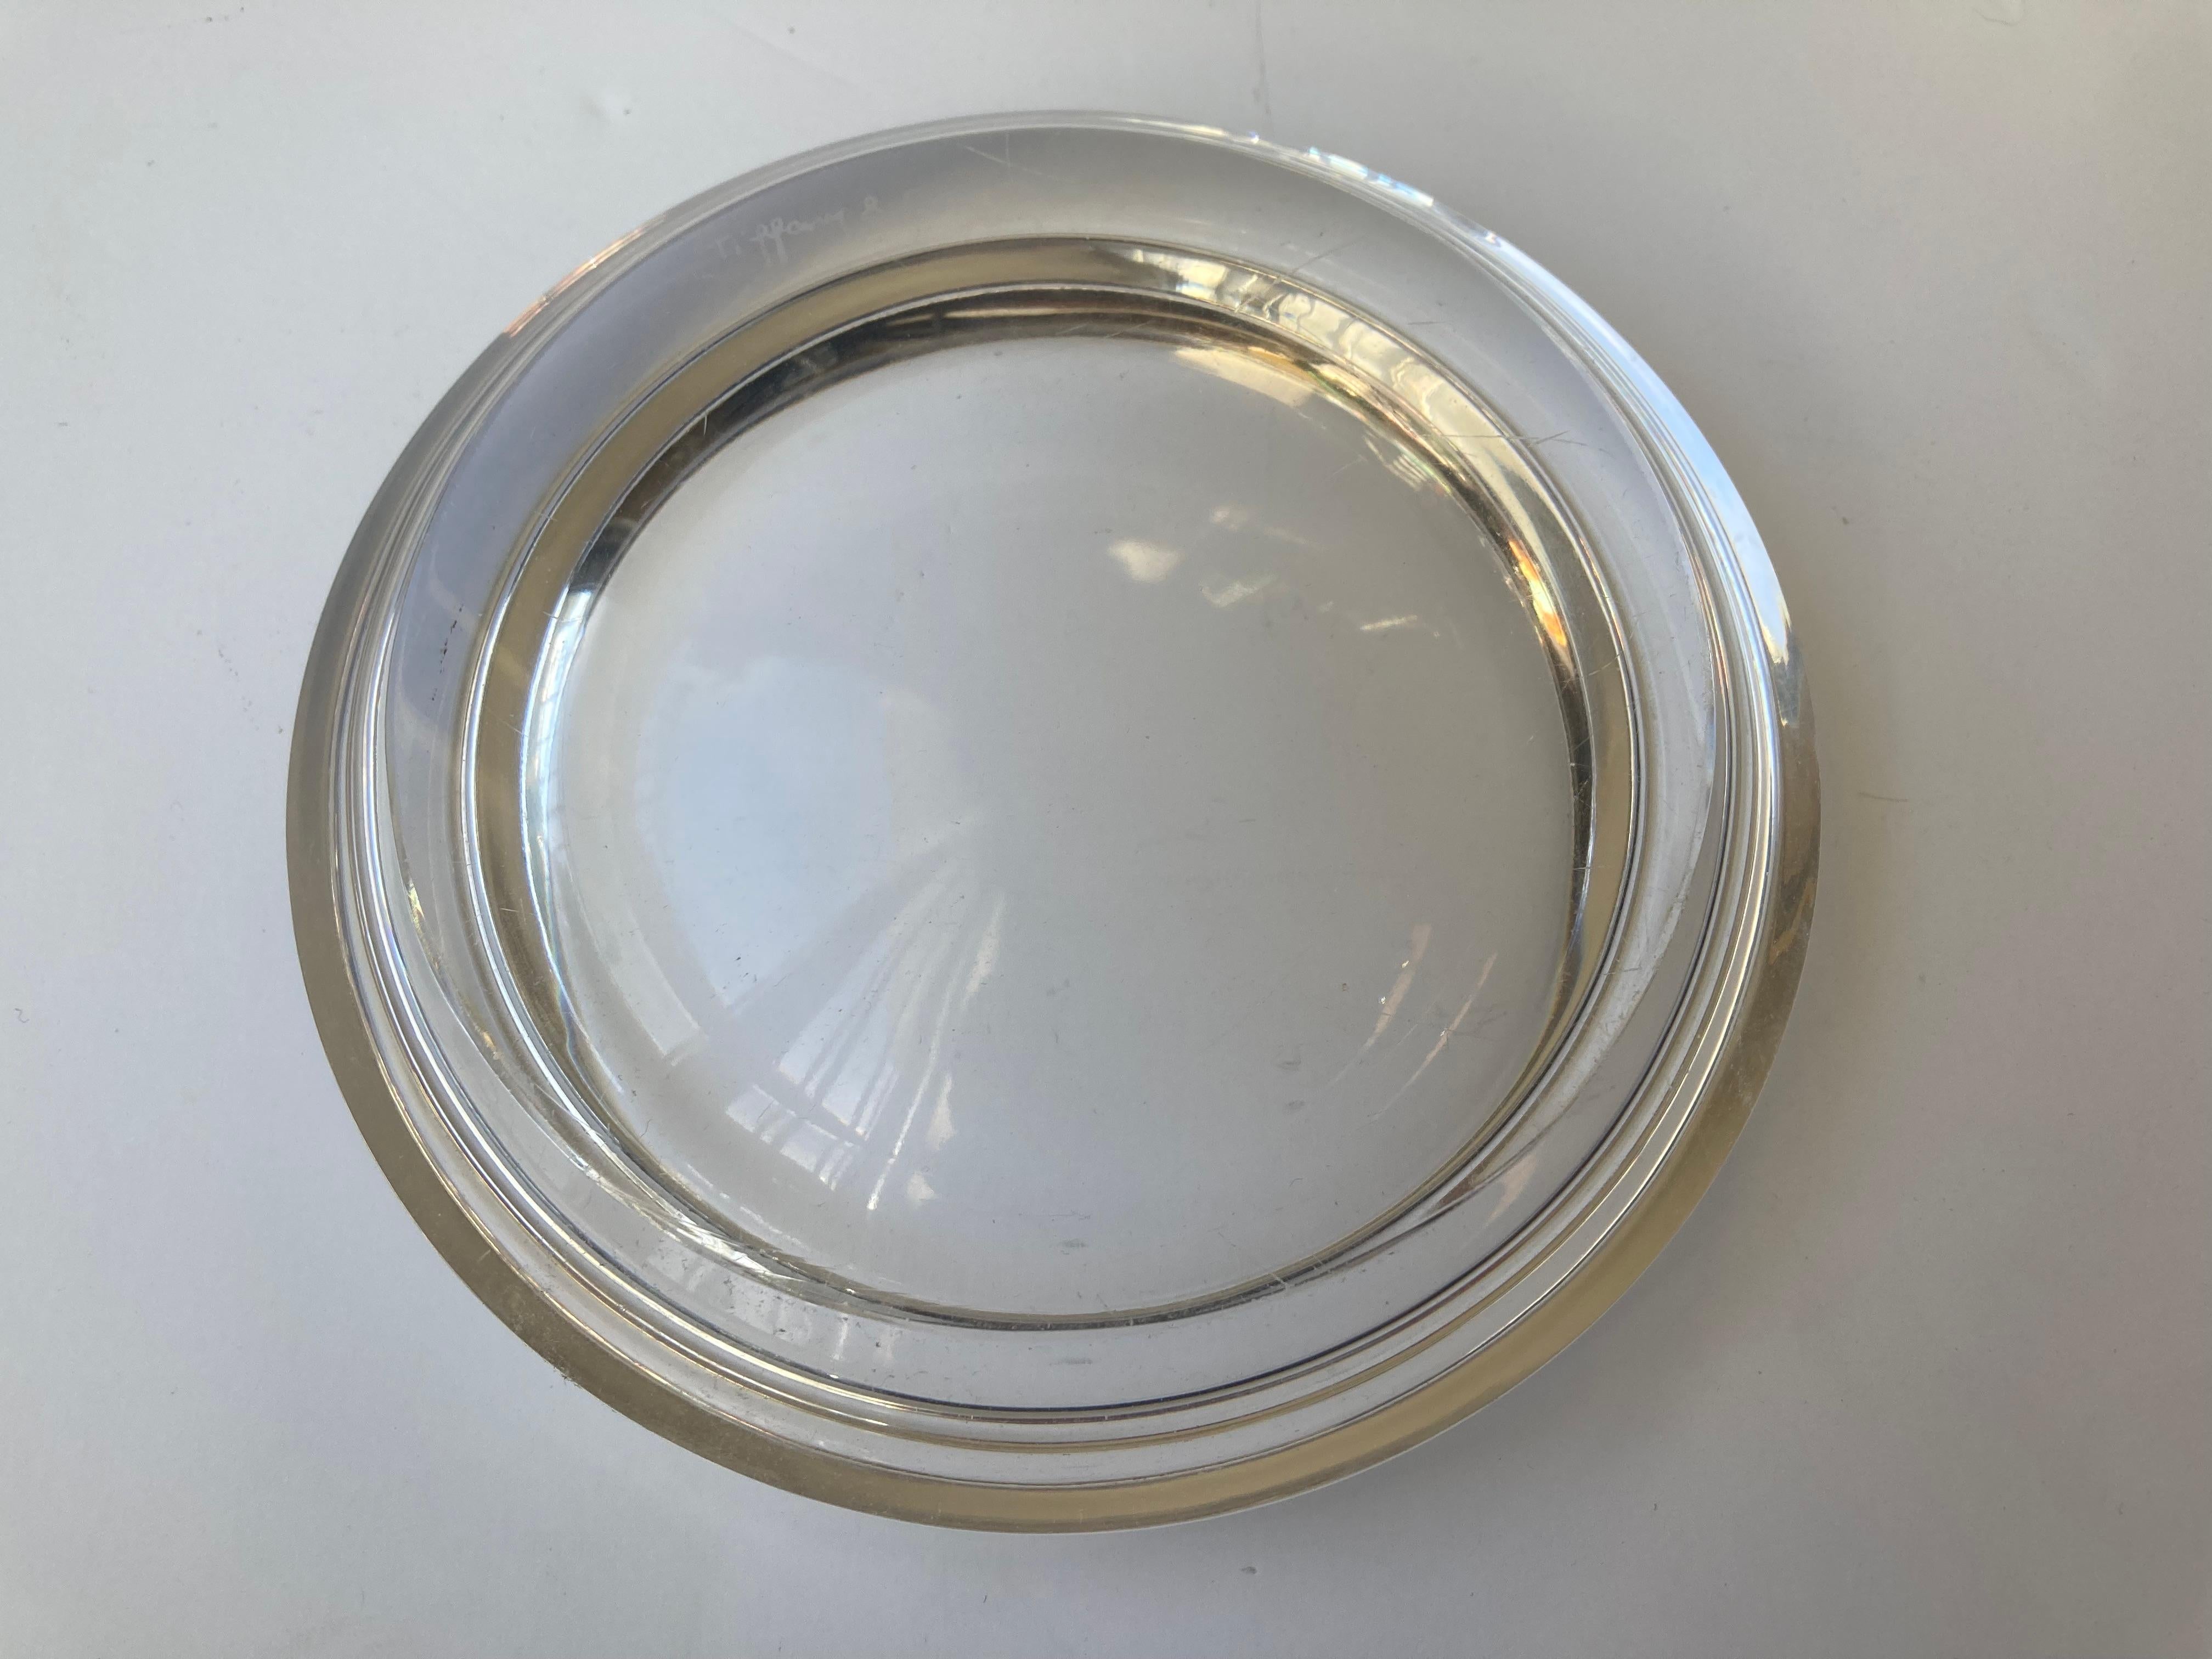 Hand-Crafted Ward Bennett bowl/ Vide - Poche  clear glass for Tiffany Co .Signed  For Sale